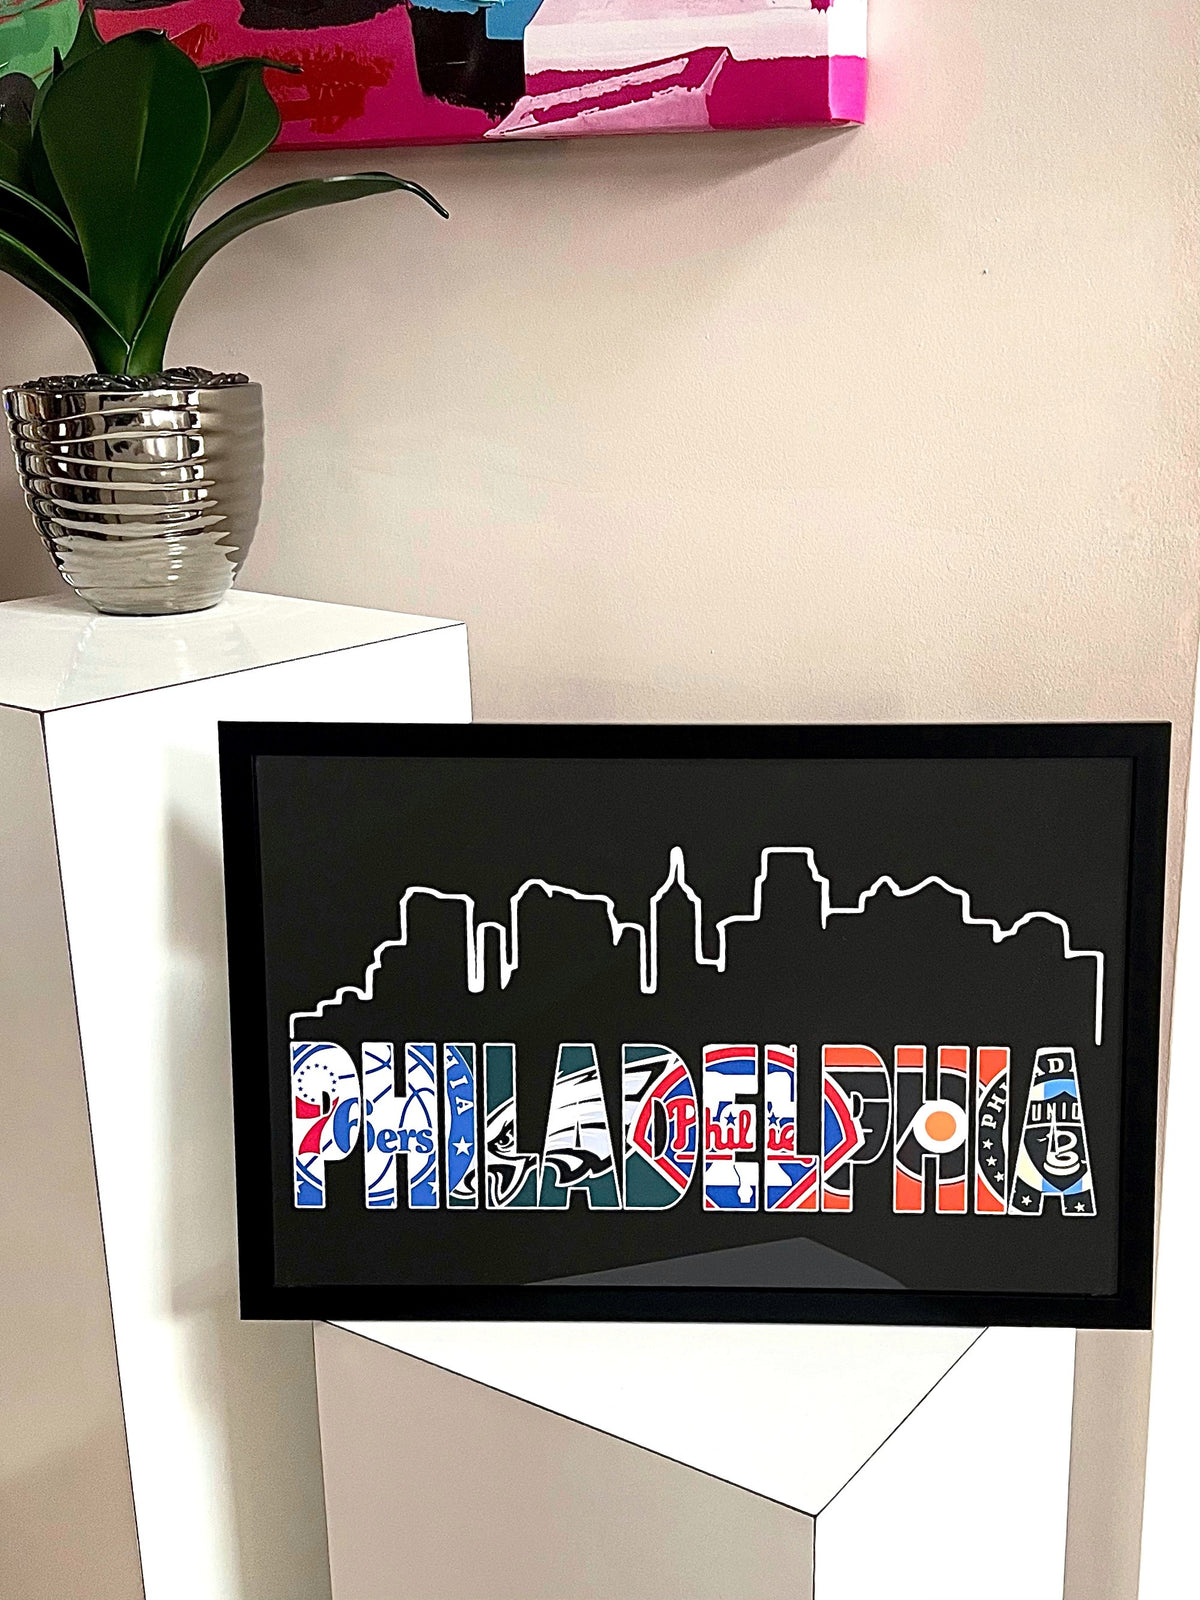 Philadelphia Sports Wall Decor Artwork Print Philly Skyline Mashup Mash-up Fusion Sports Teams: Eagles Football, Flyers Hockey, 76ers Basketball, Phillies Baseball, and Union Soccer. Unique Father's Day gift or birthday Dad, Son, Uncle, Nephew, Grandfather (Grandad/Grandpa/PopPop), Boss, Employee, Neighbor, Friend